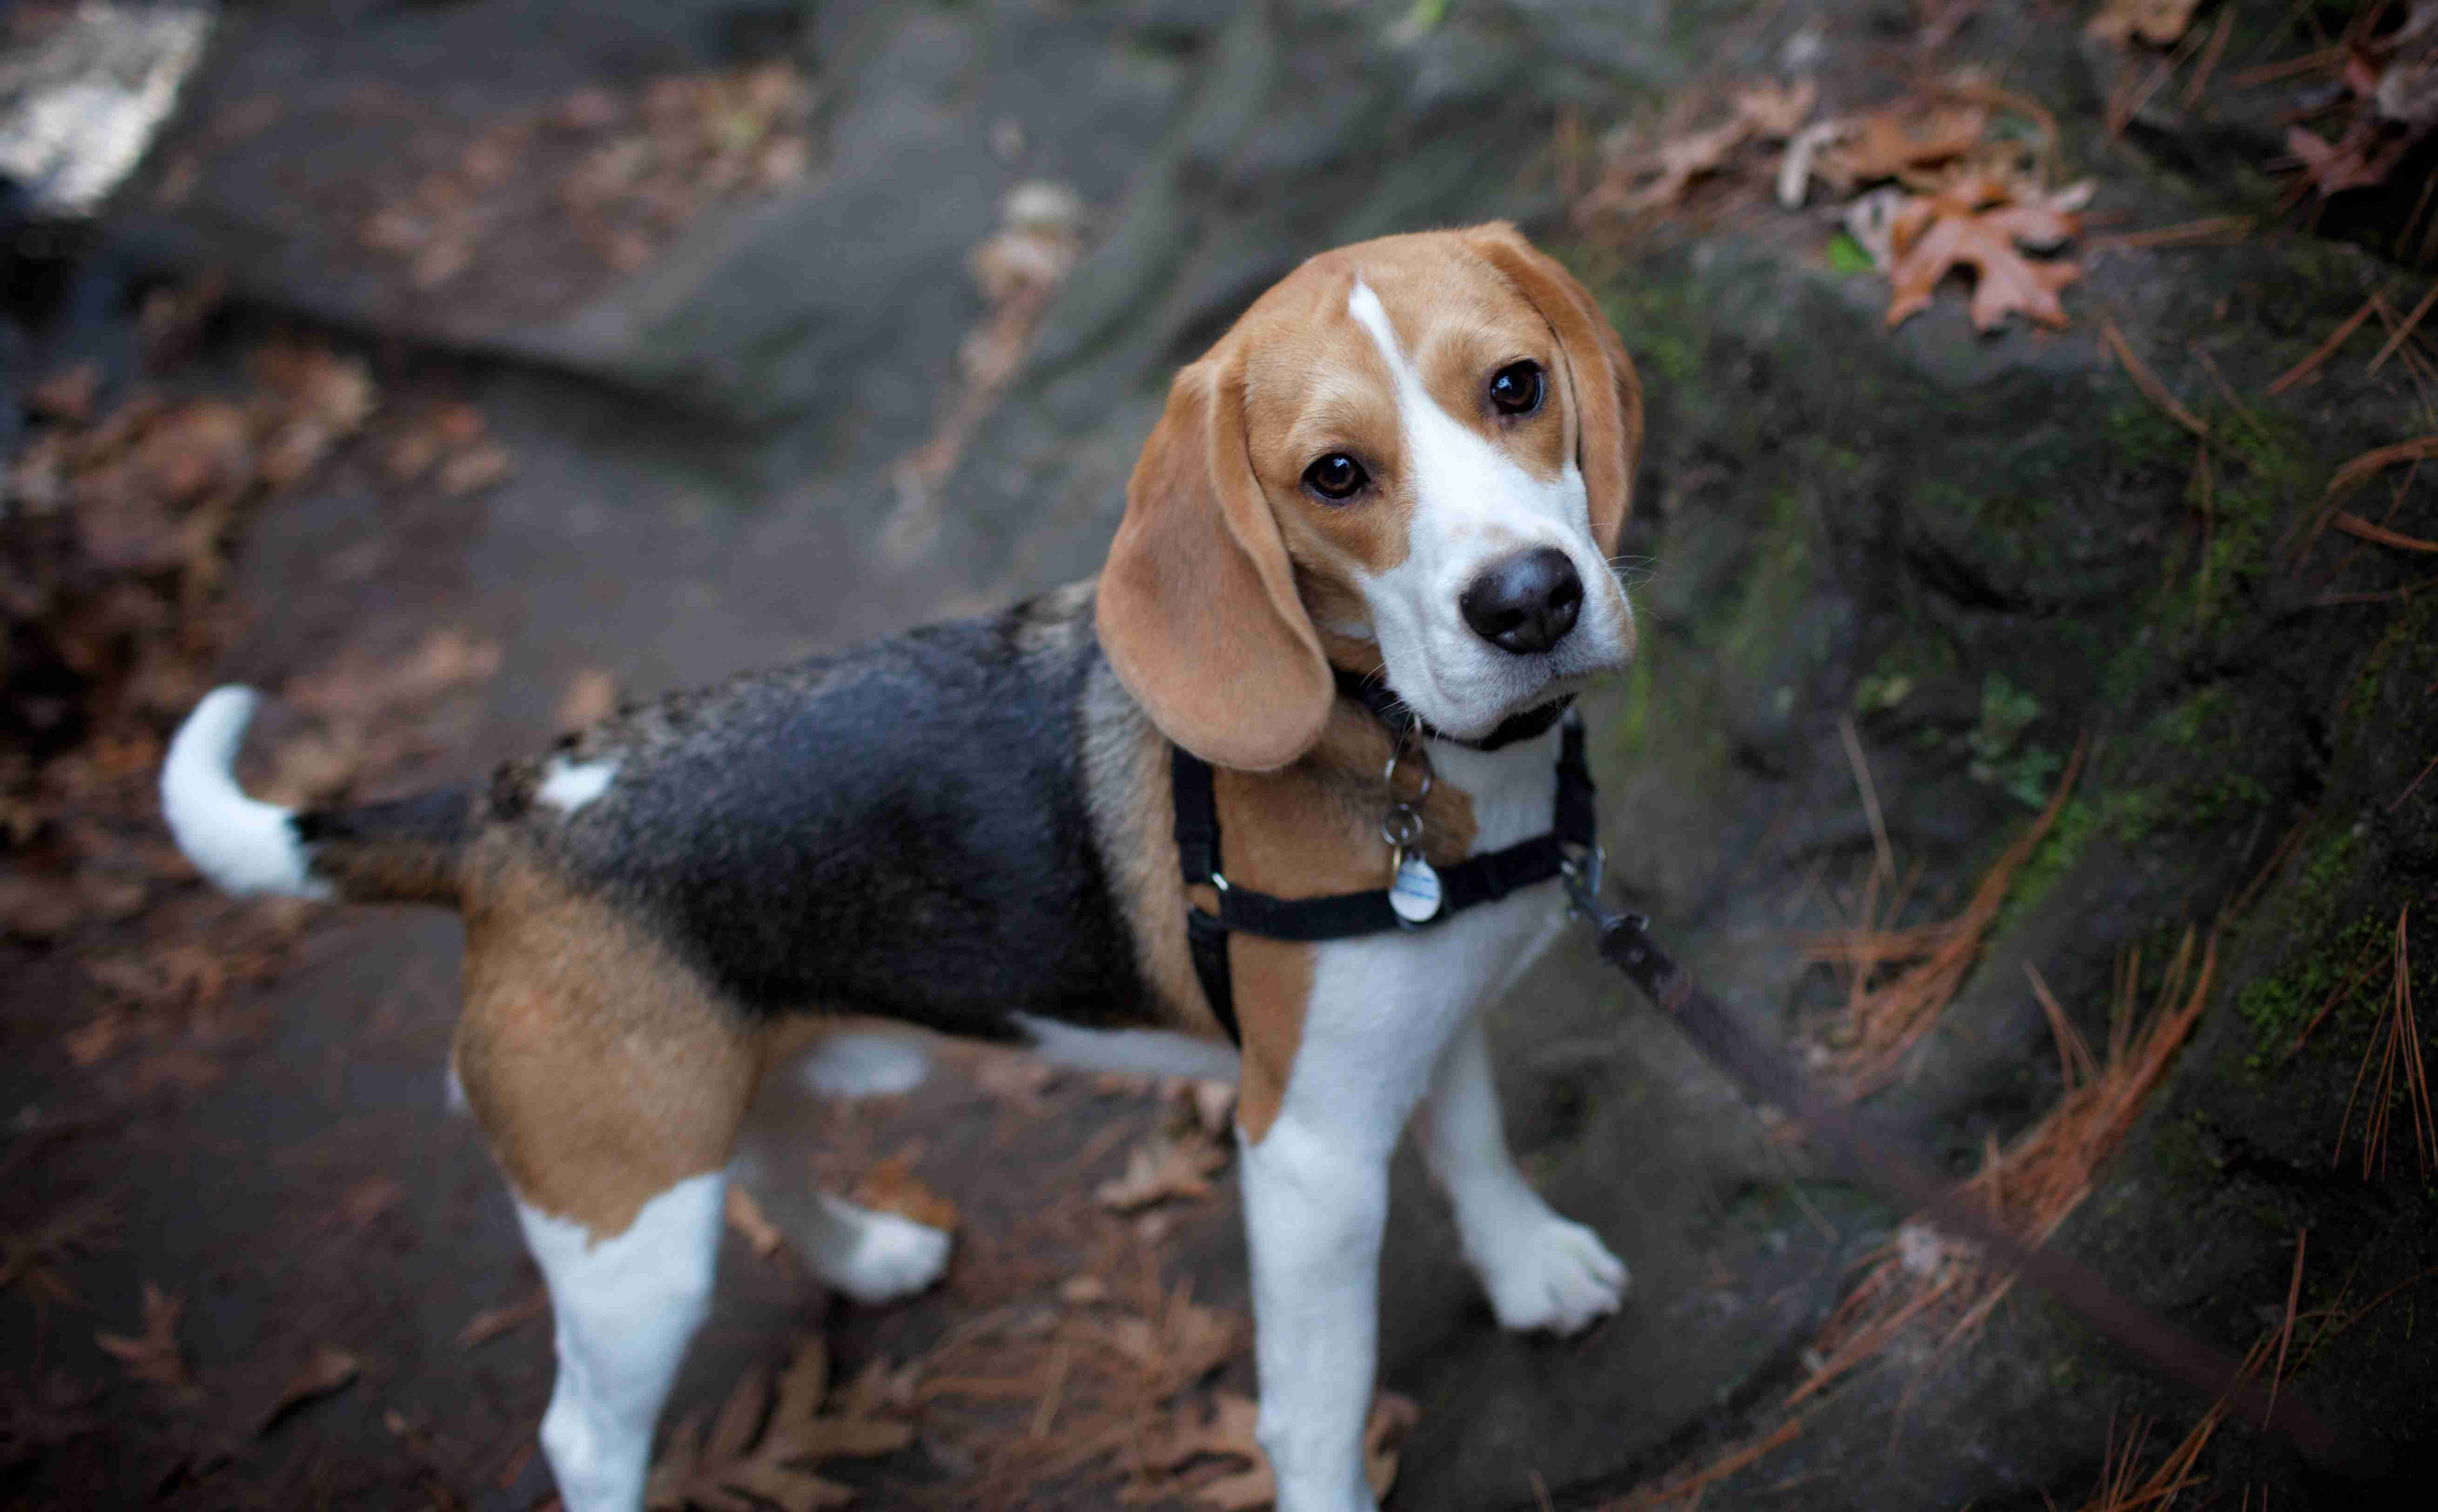 10 Fun Ways to Keep Your Beagle Active and Happy During Winter Months